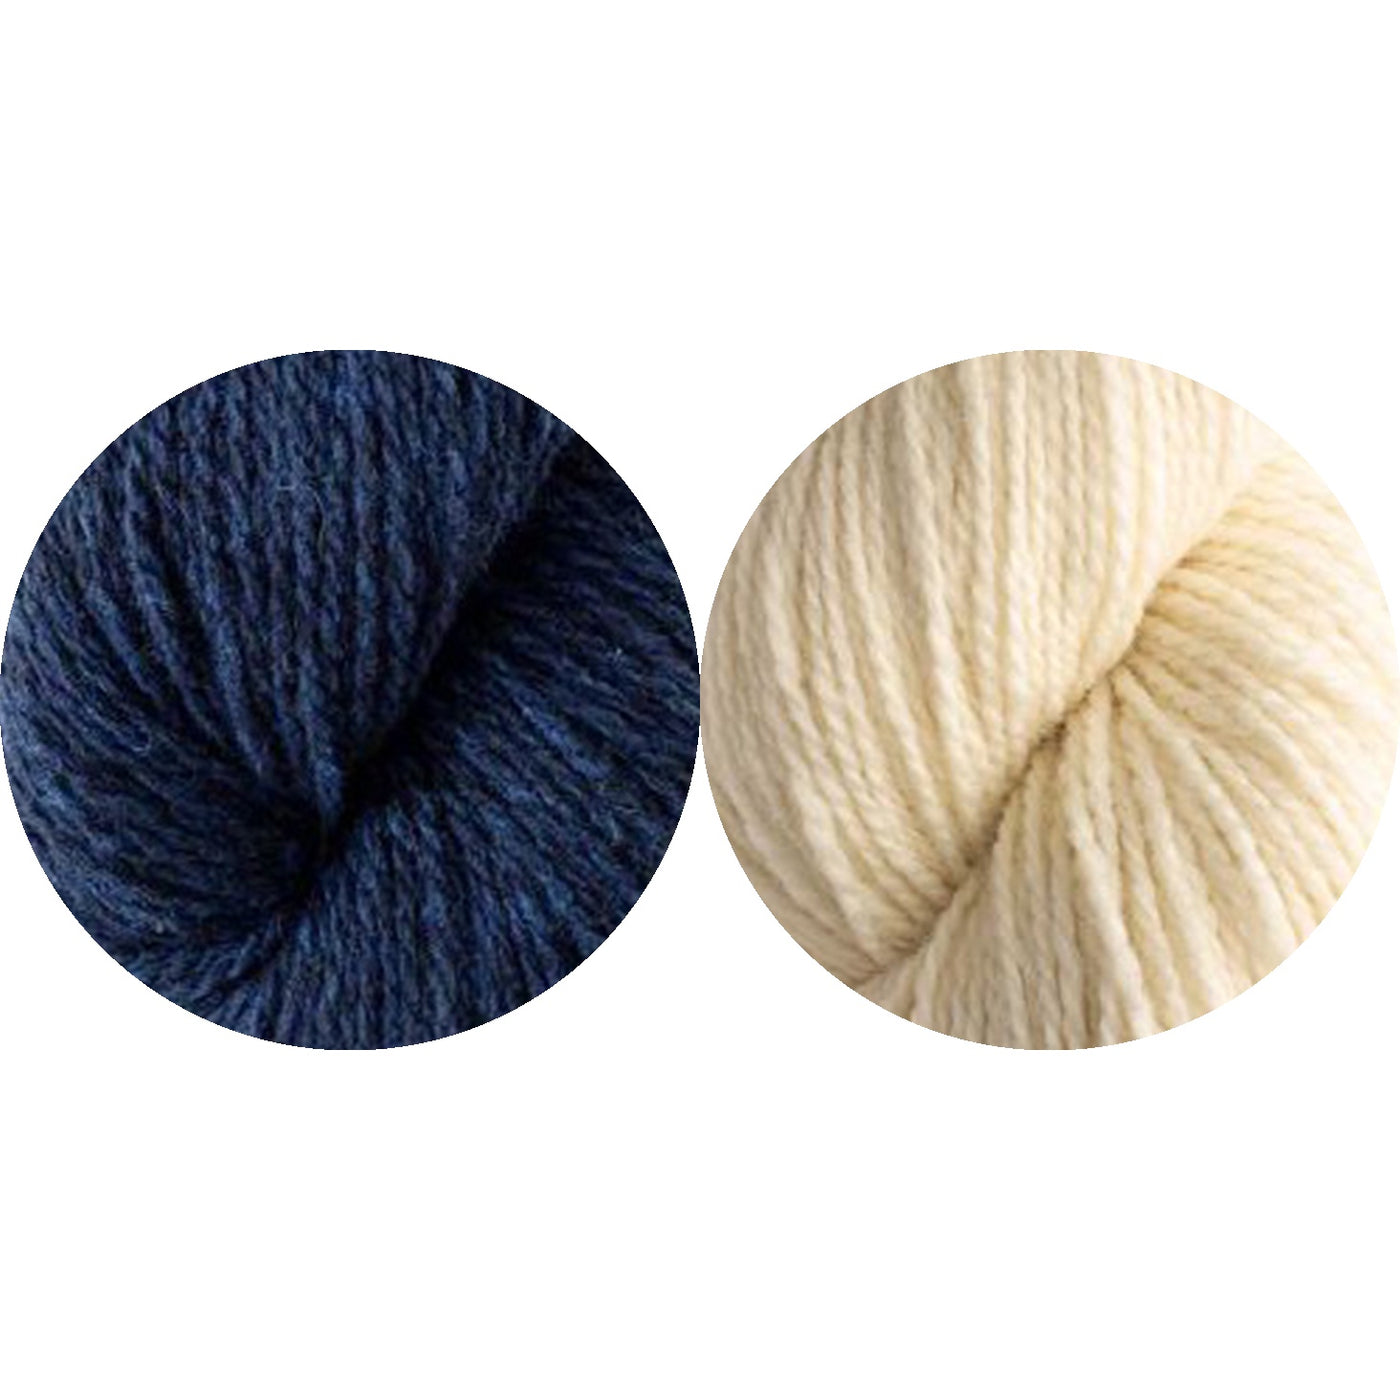 Winterberry Stocking Kit (Midnight Blue and White)